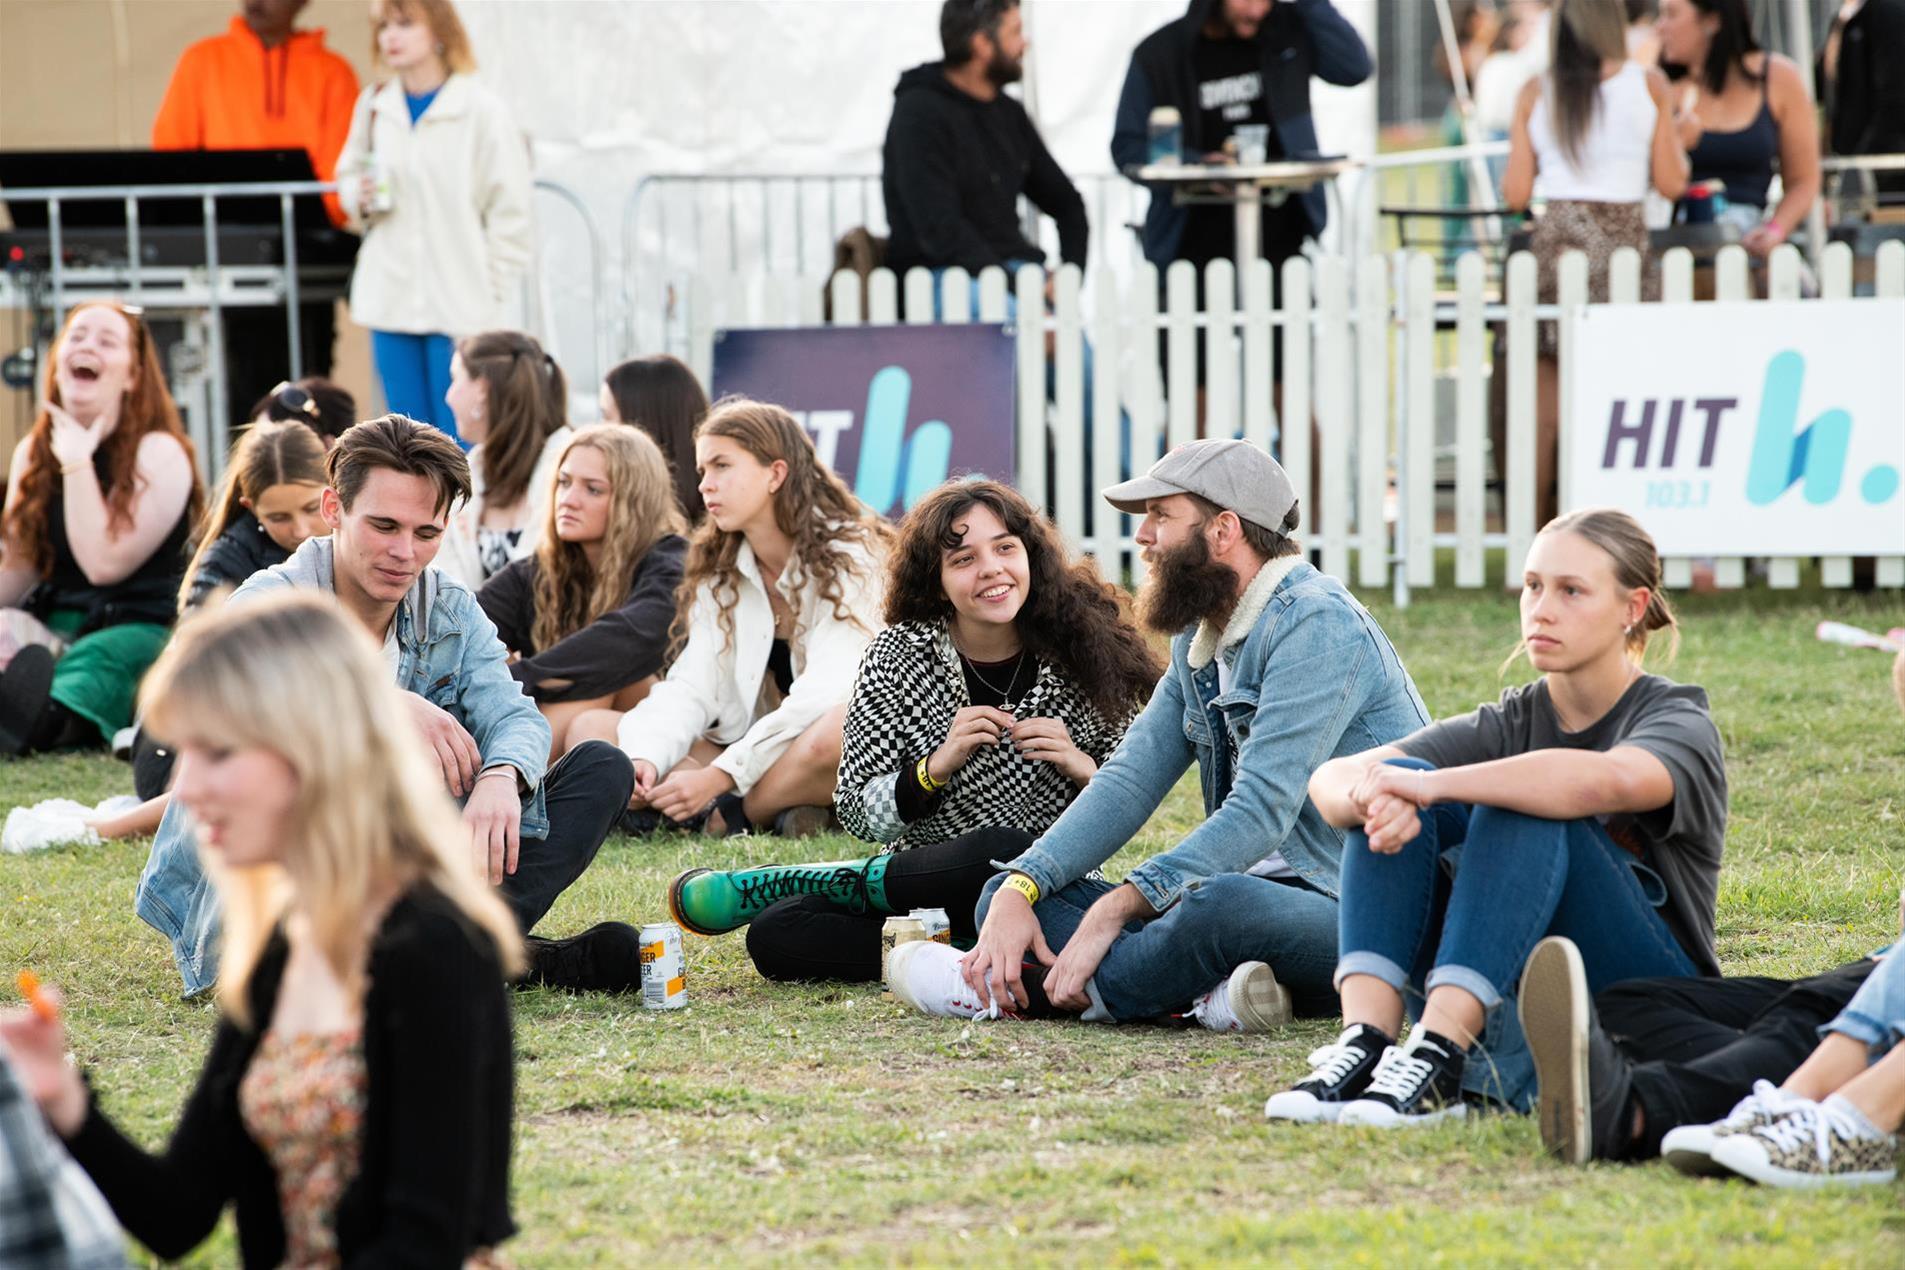 A group of people sitting on the grass at a music festival.